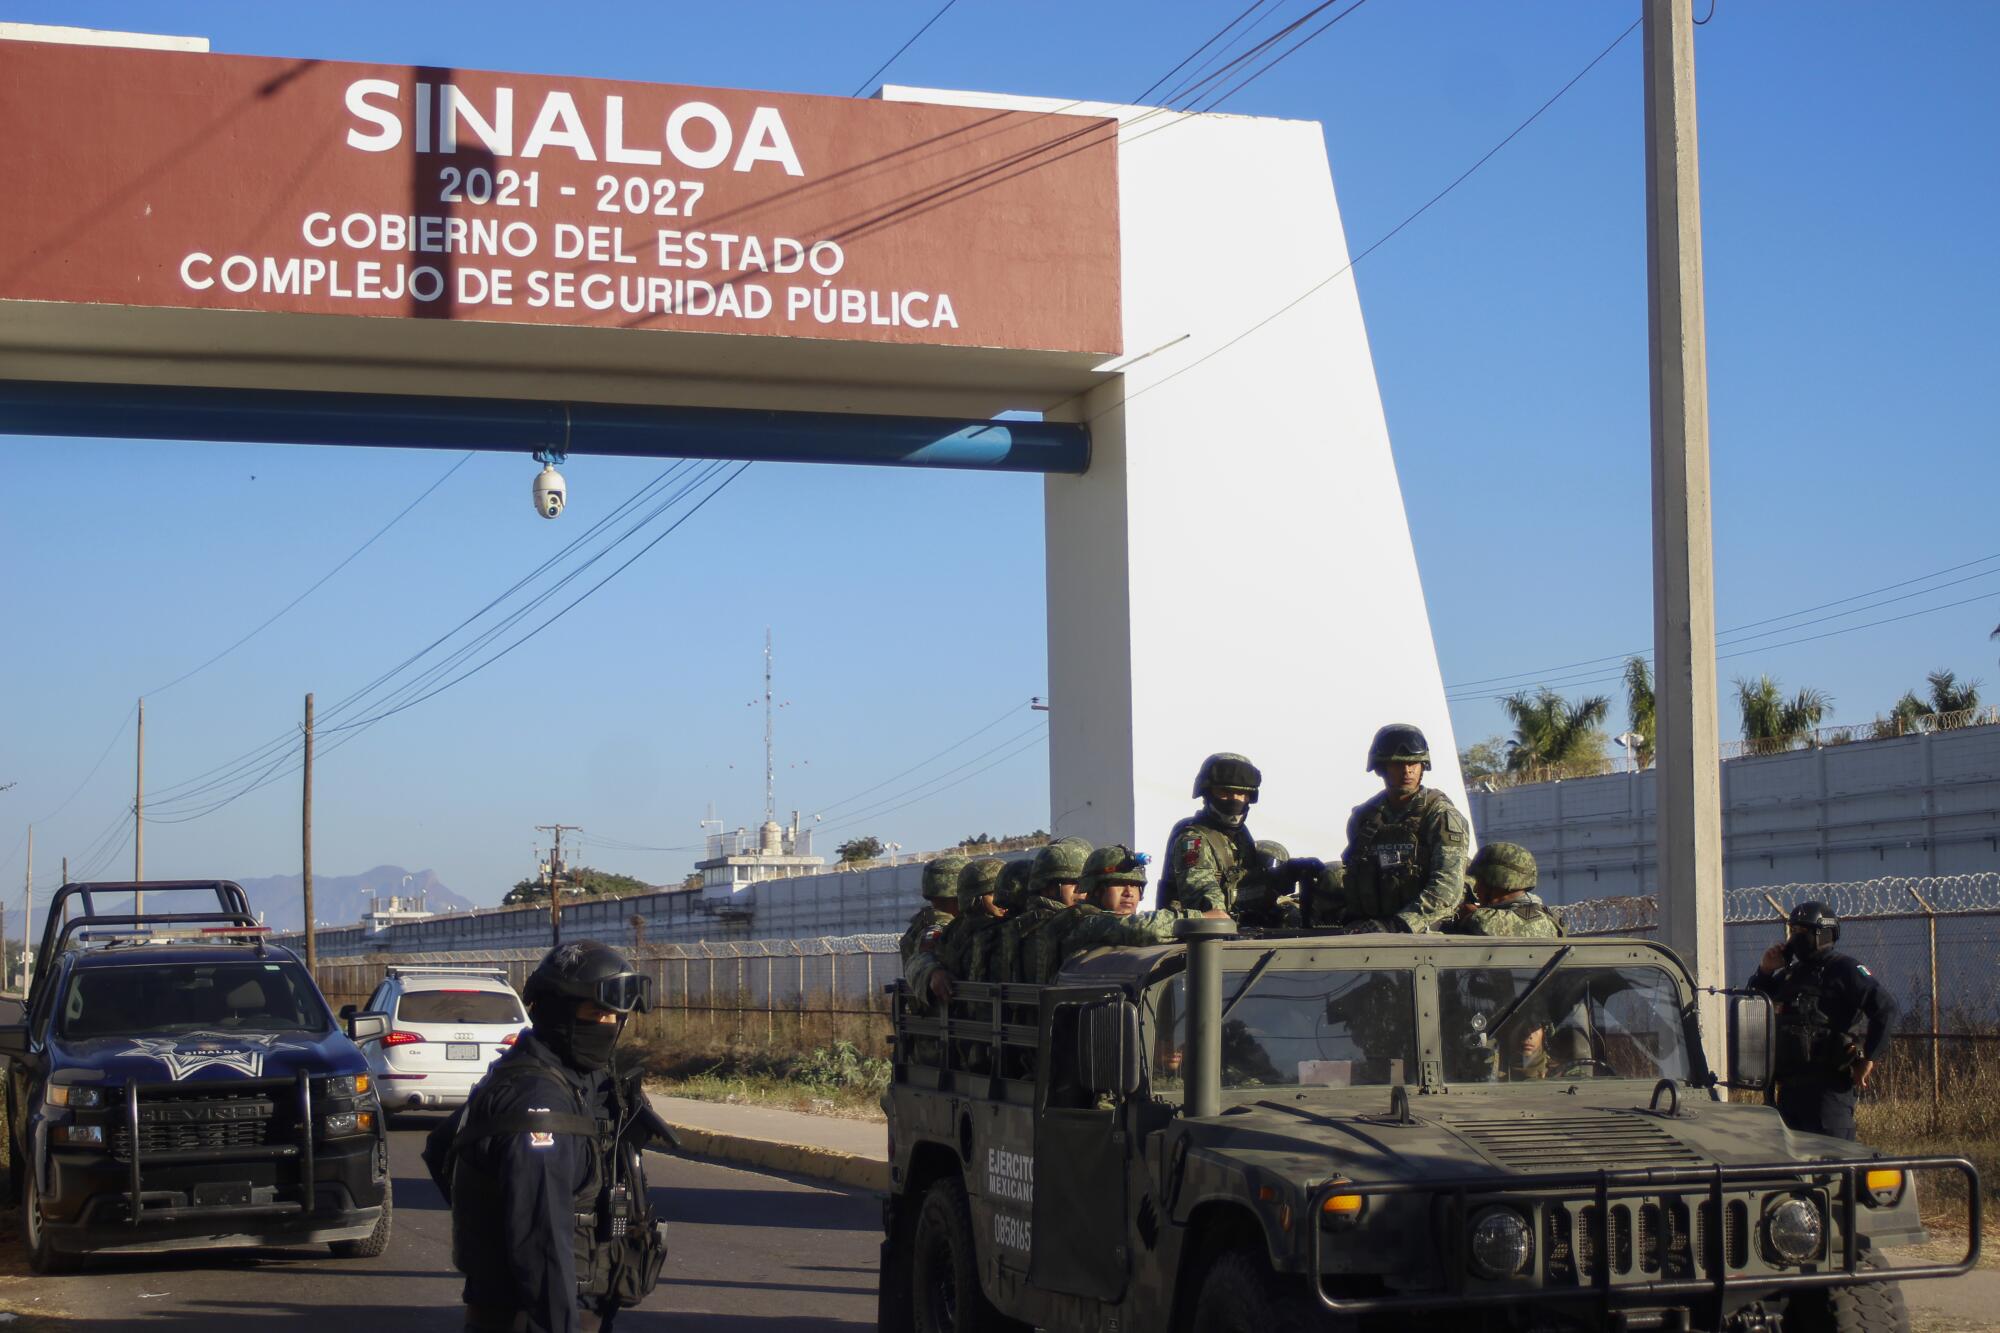 Police and military vehicles patrol a road near an overpass that reads "Sinaloa"